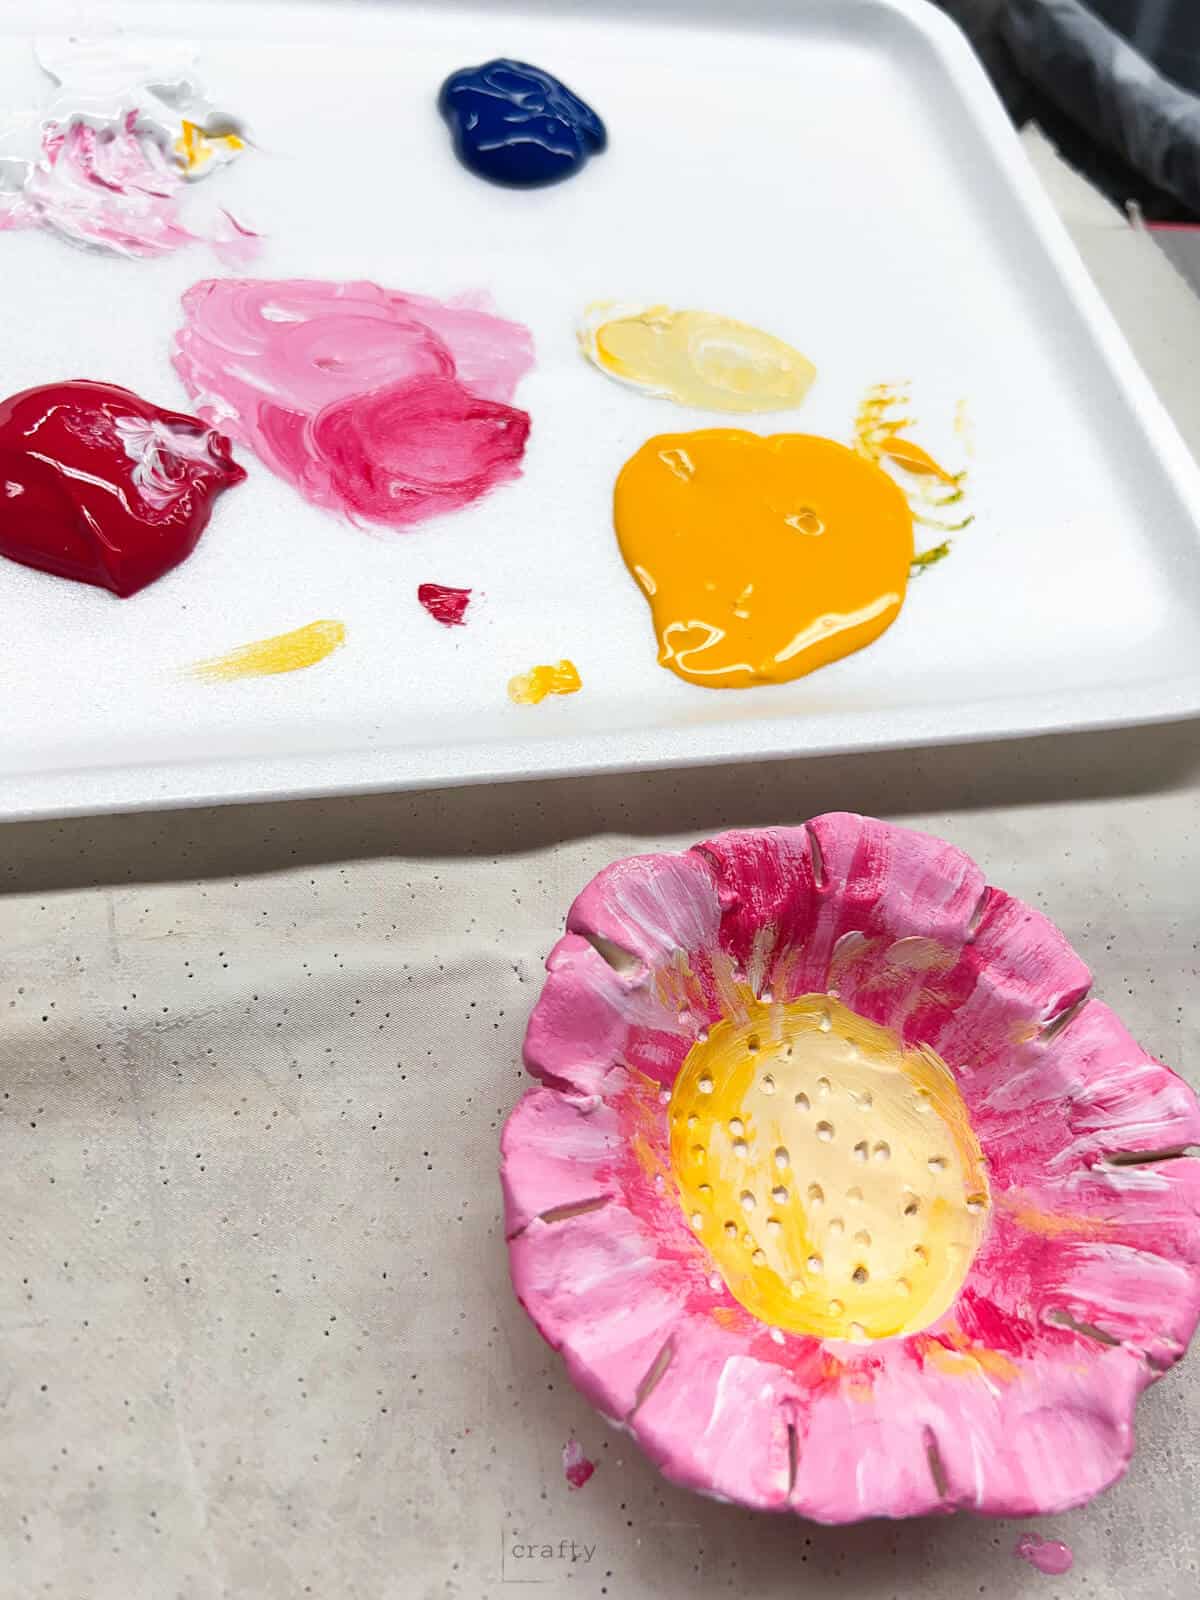 yellow and pink painted clay flower pinch pot art project.